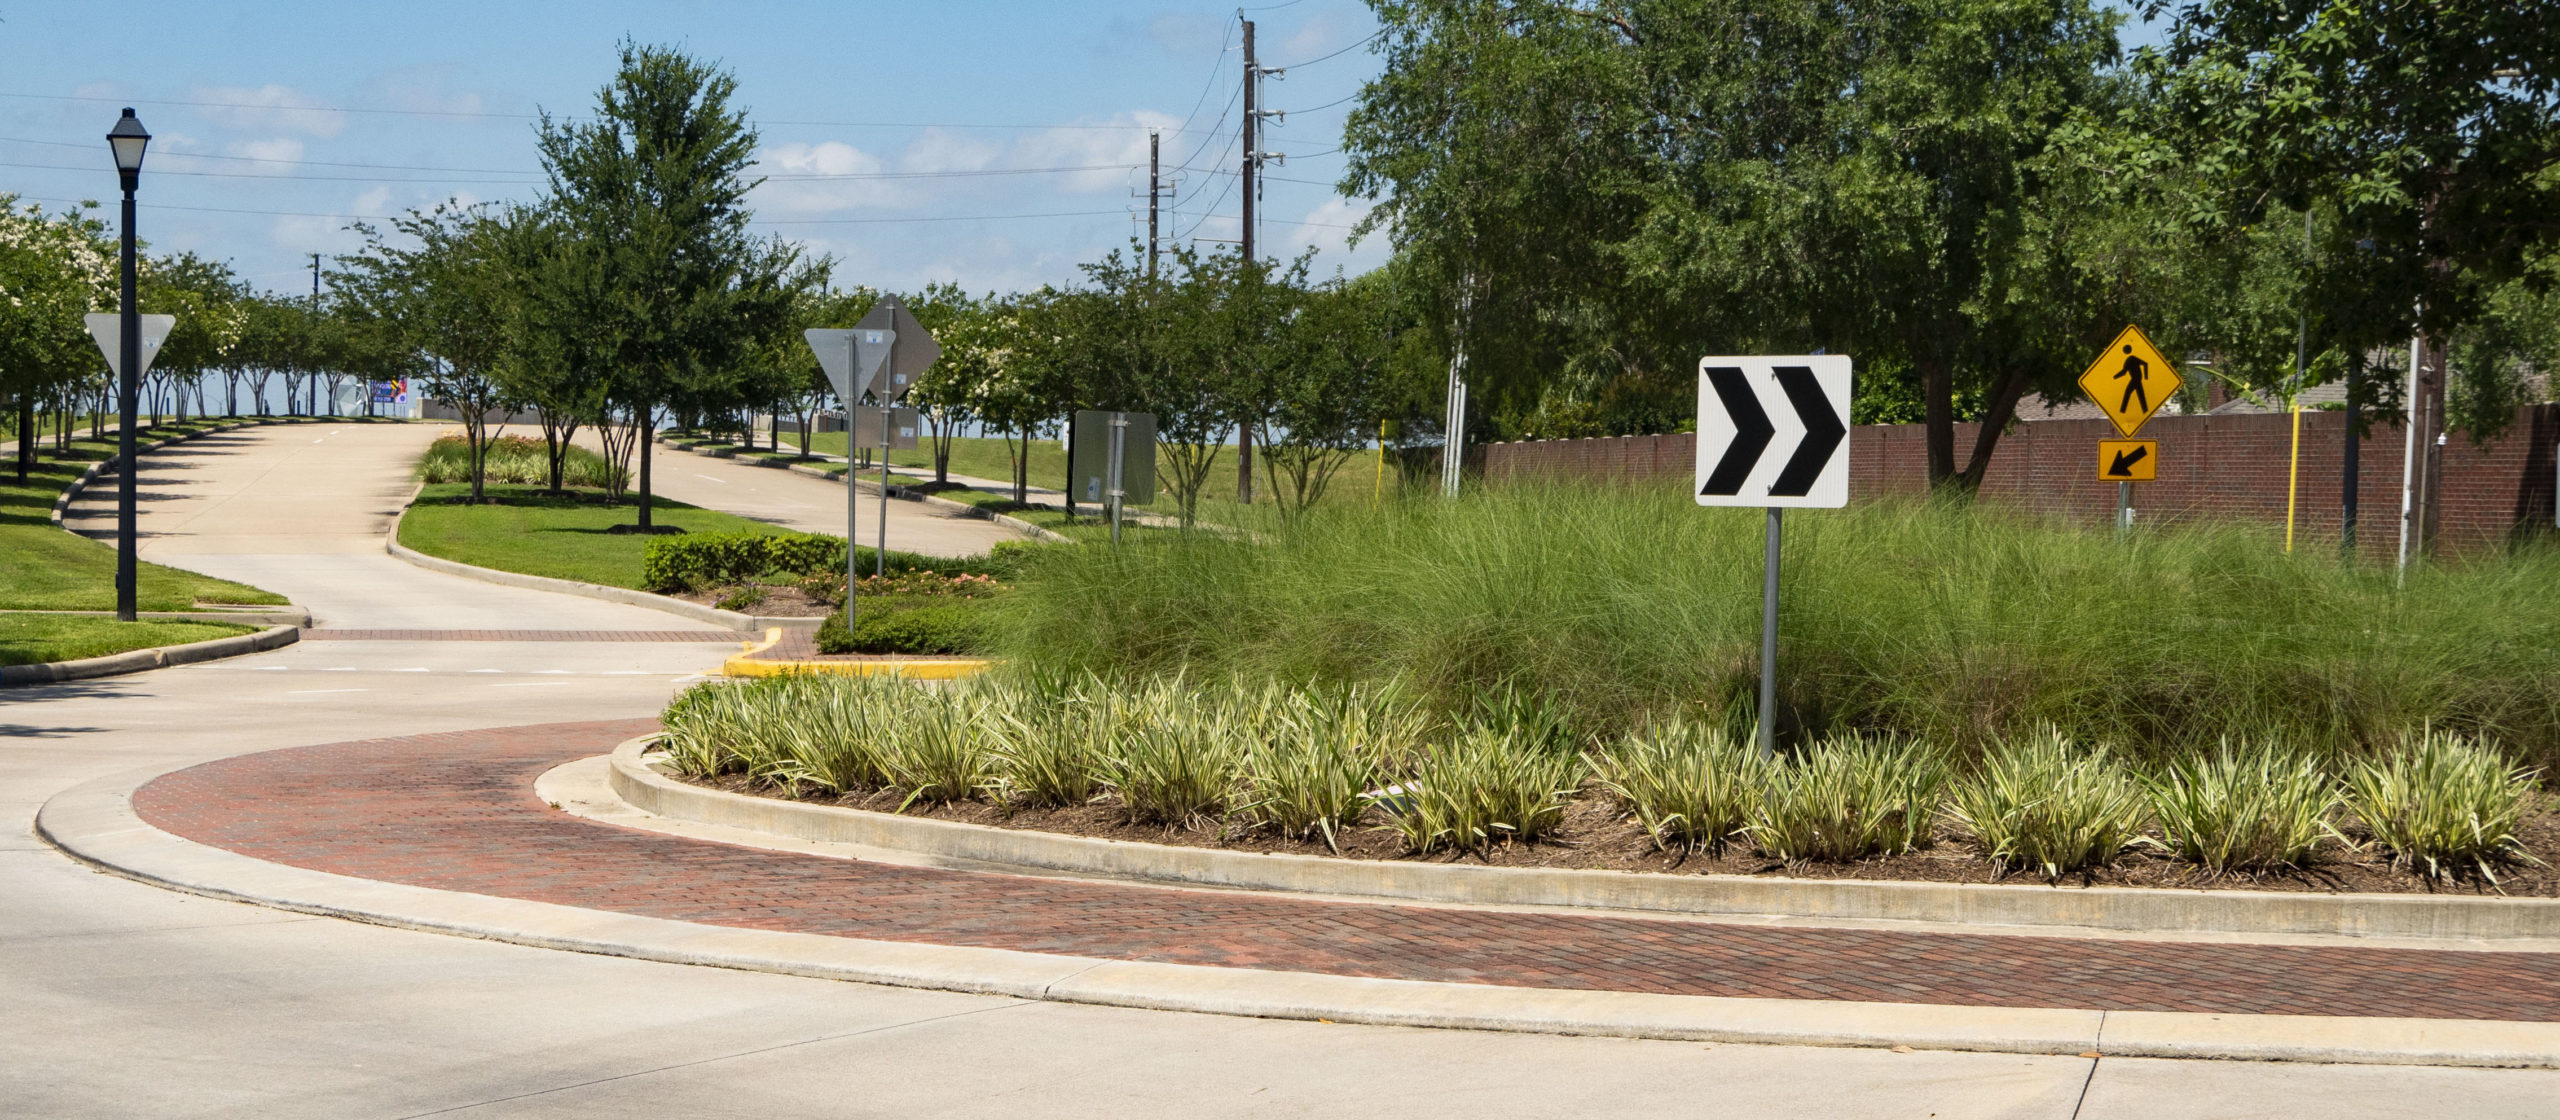 Roundabout with landscaping at Lexington Blvd & Oxbow Dr.